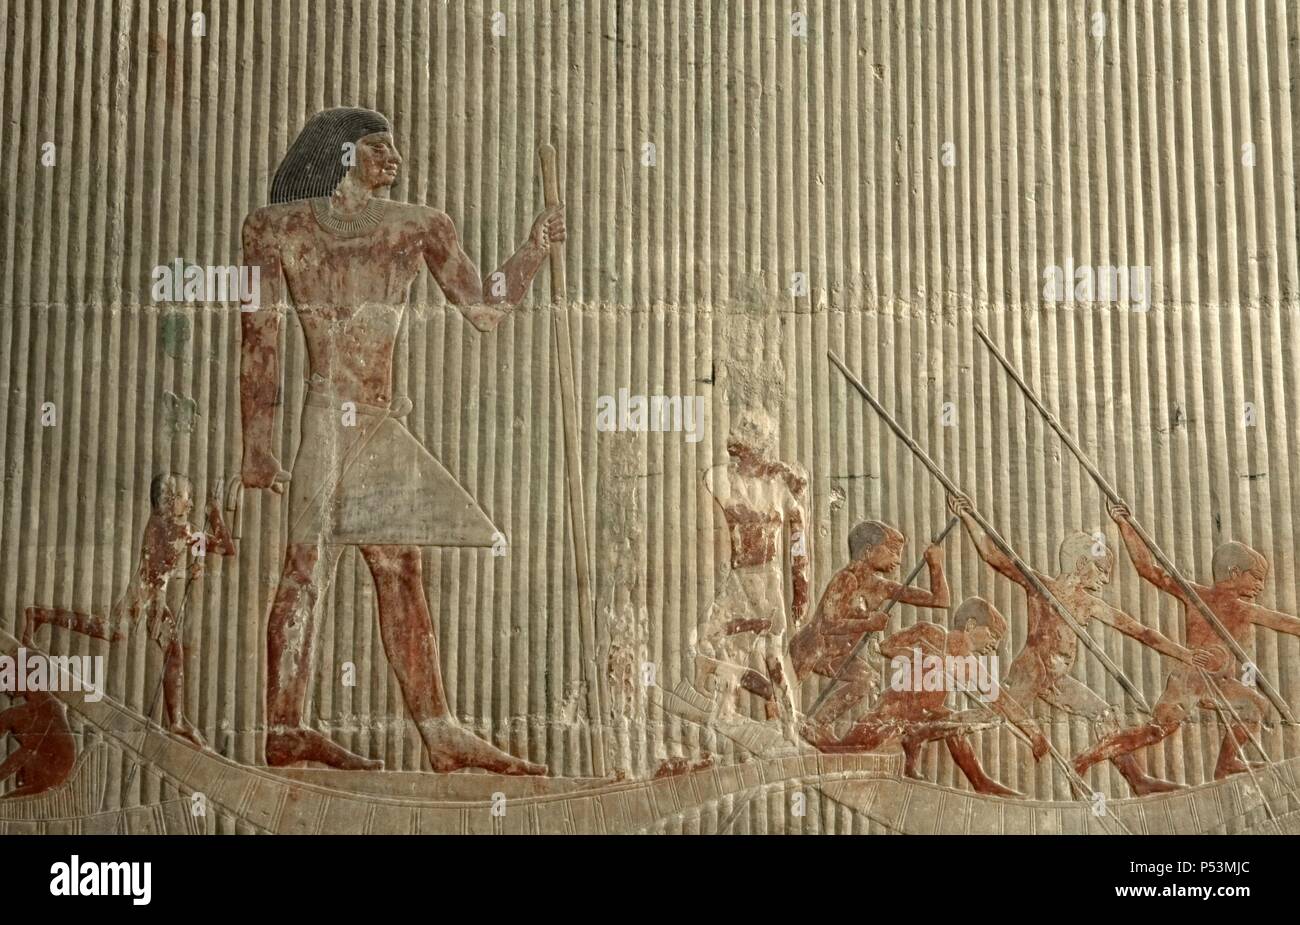 Egypt. Saqqara. Mastaba of Ti. Relief depicting hunting scene. Hunters nailing his lances into the hippos and crocodiles while Ti, depicted with a dwarf, standing on a papyrus boat presiding over a hippopotamus hunt. Detail. 5th Dynasty. Old Kingdom. Stock Photo